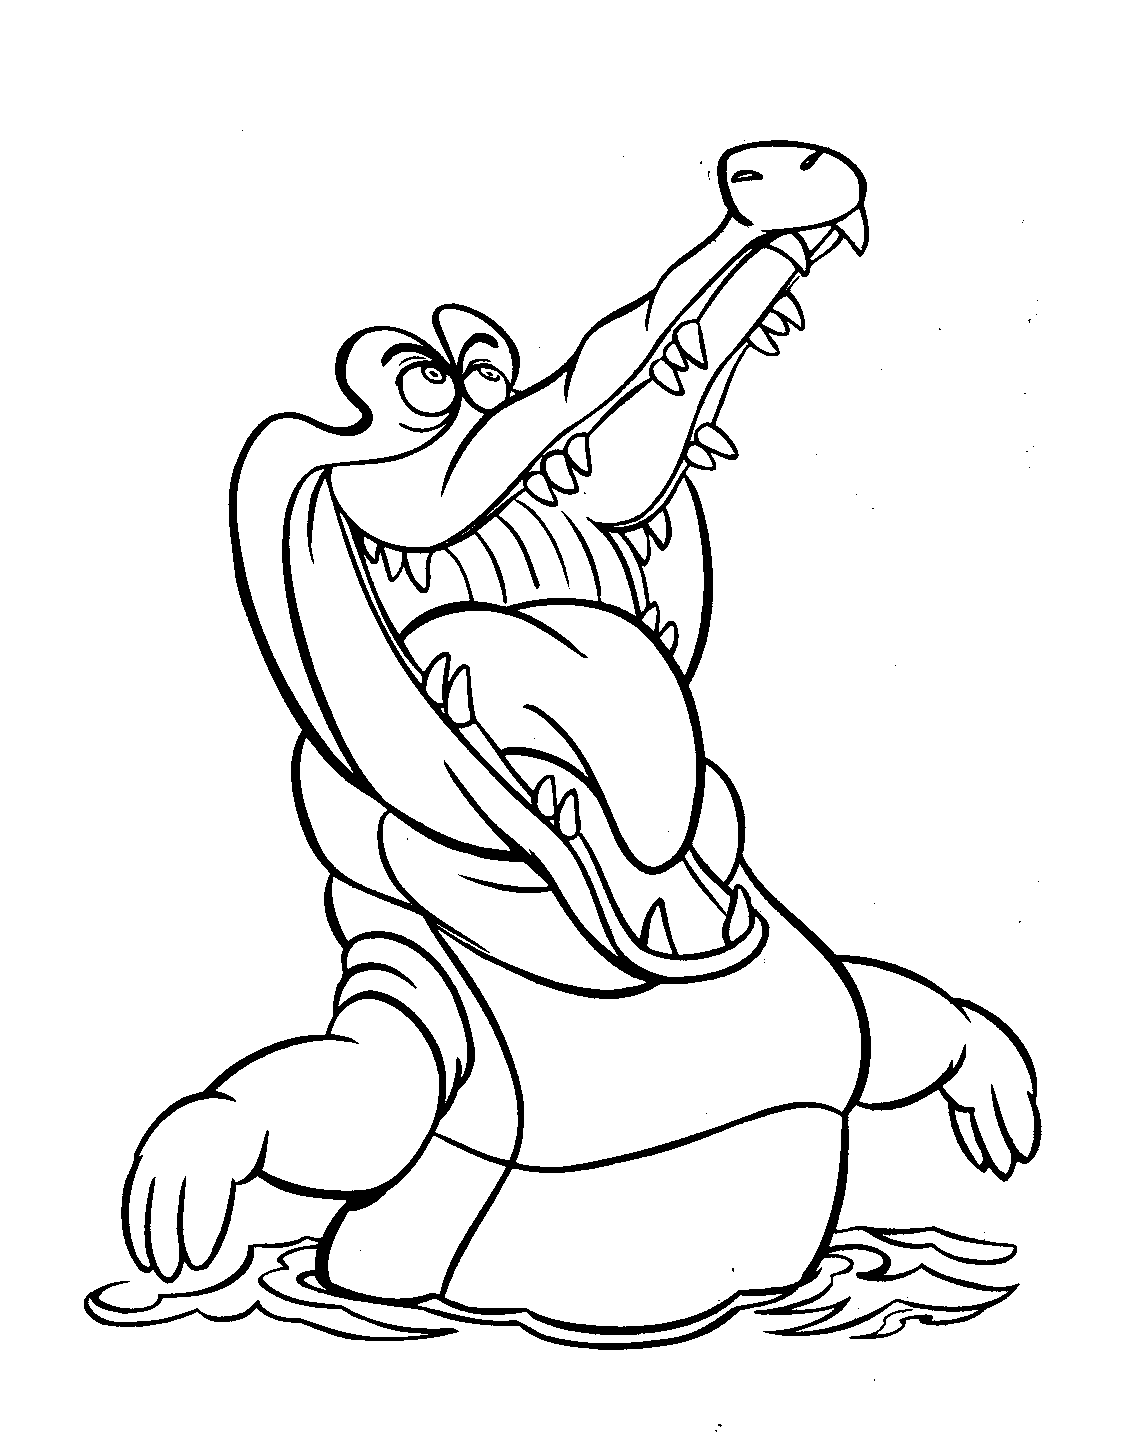 Coloring page: Jake and the Never Land Pirates (Cartoons) #42534 - Free Printable Coloring Pages